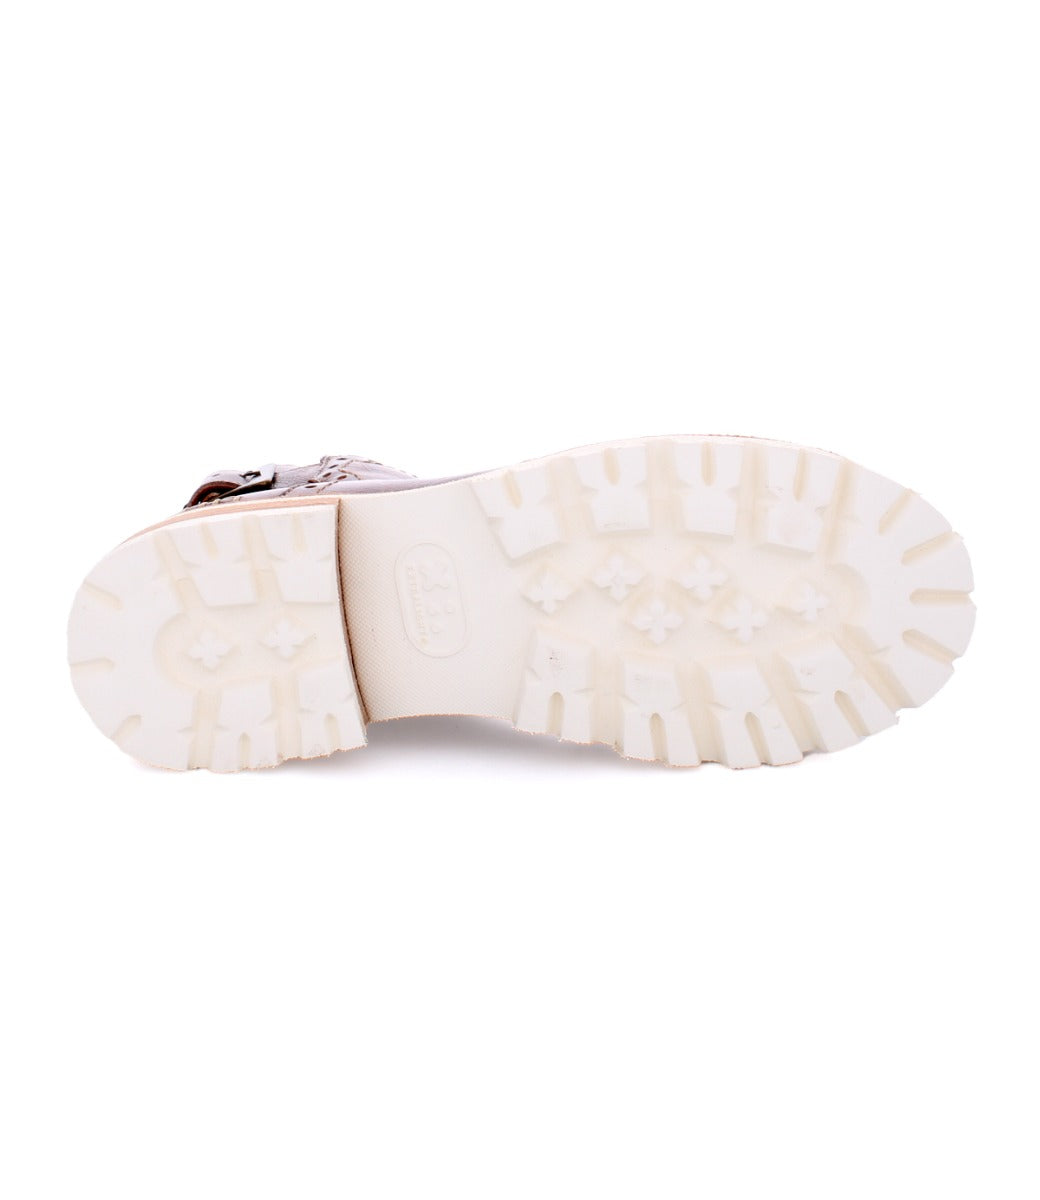 A pair of Bed Stu Brianna women's shoes with white soles on a white background.